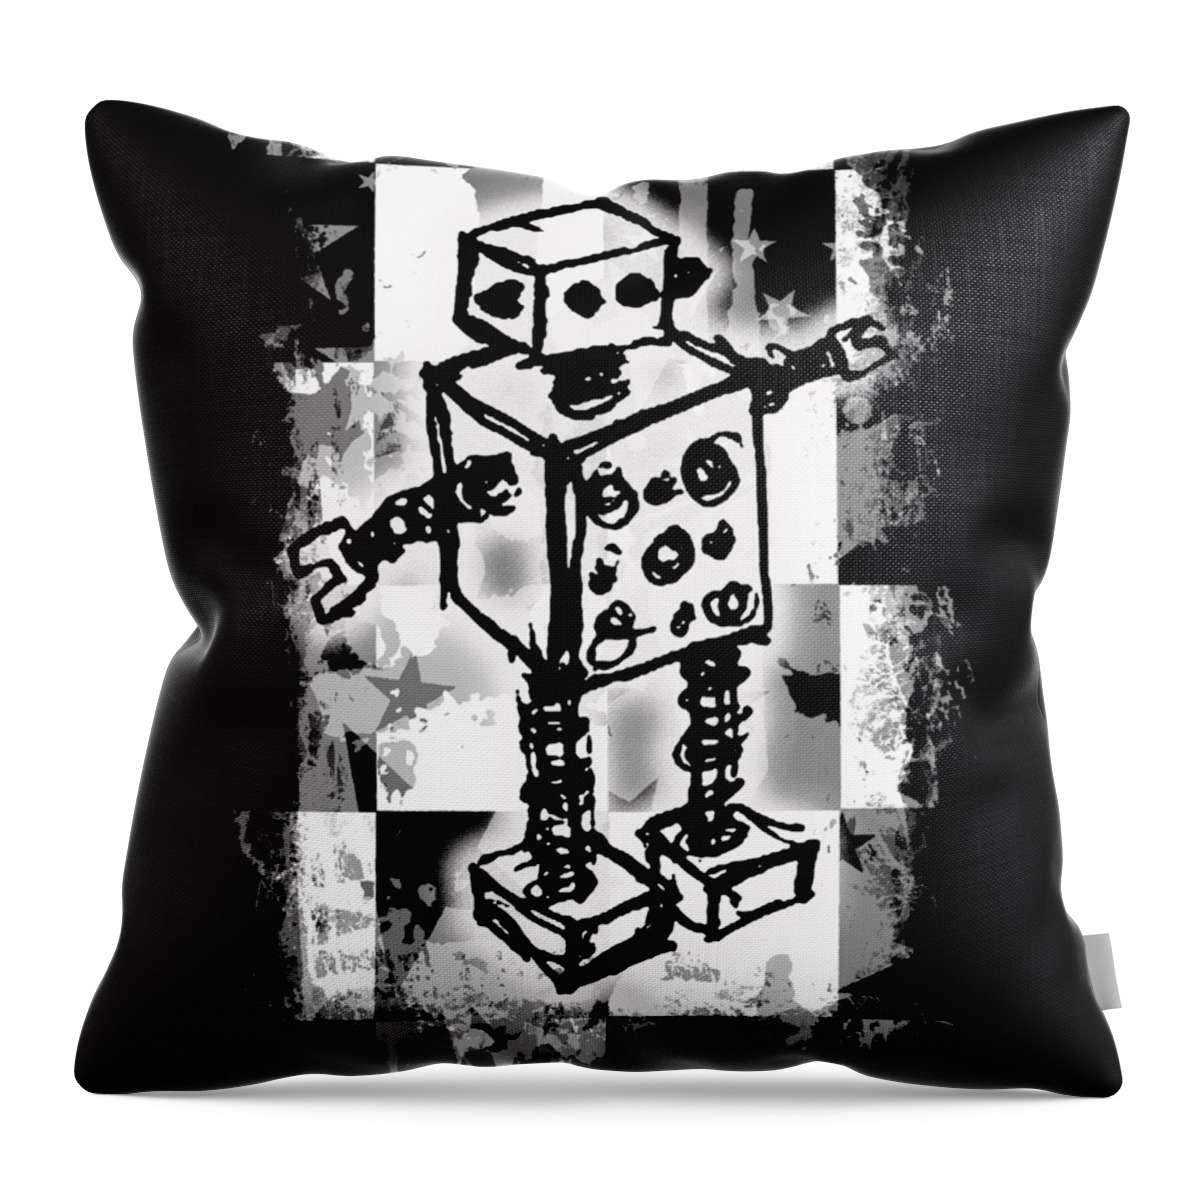 Robot Throw Pillow featuring the digital art Sketched Robot Graphic by Roseanne Jones